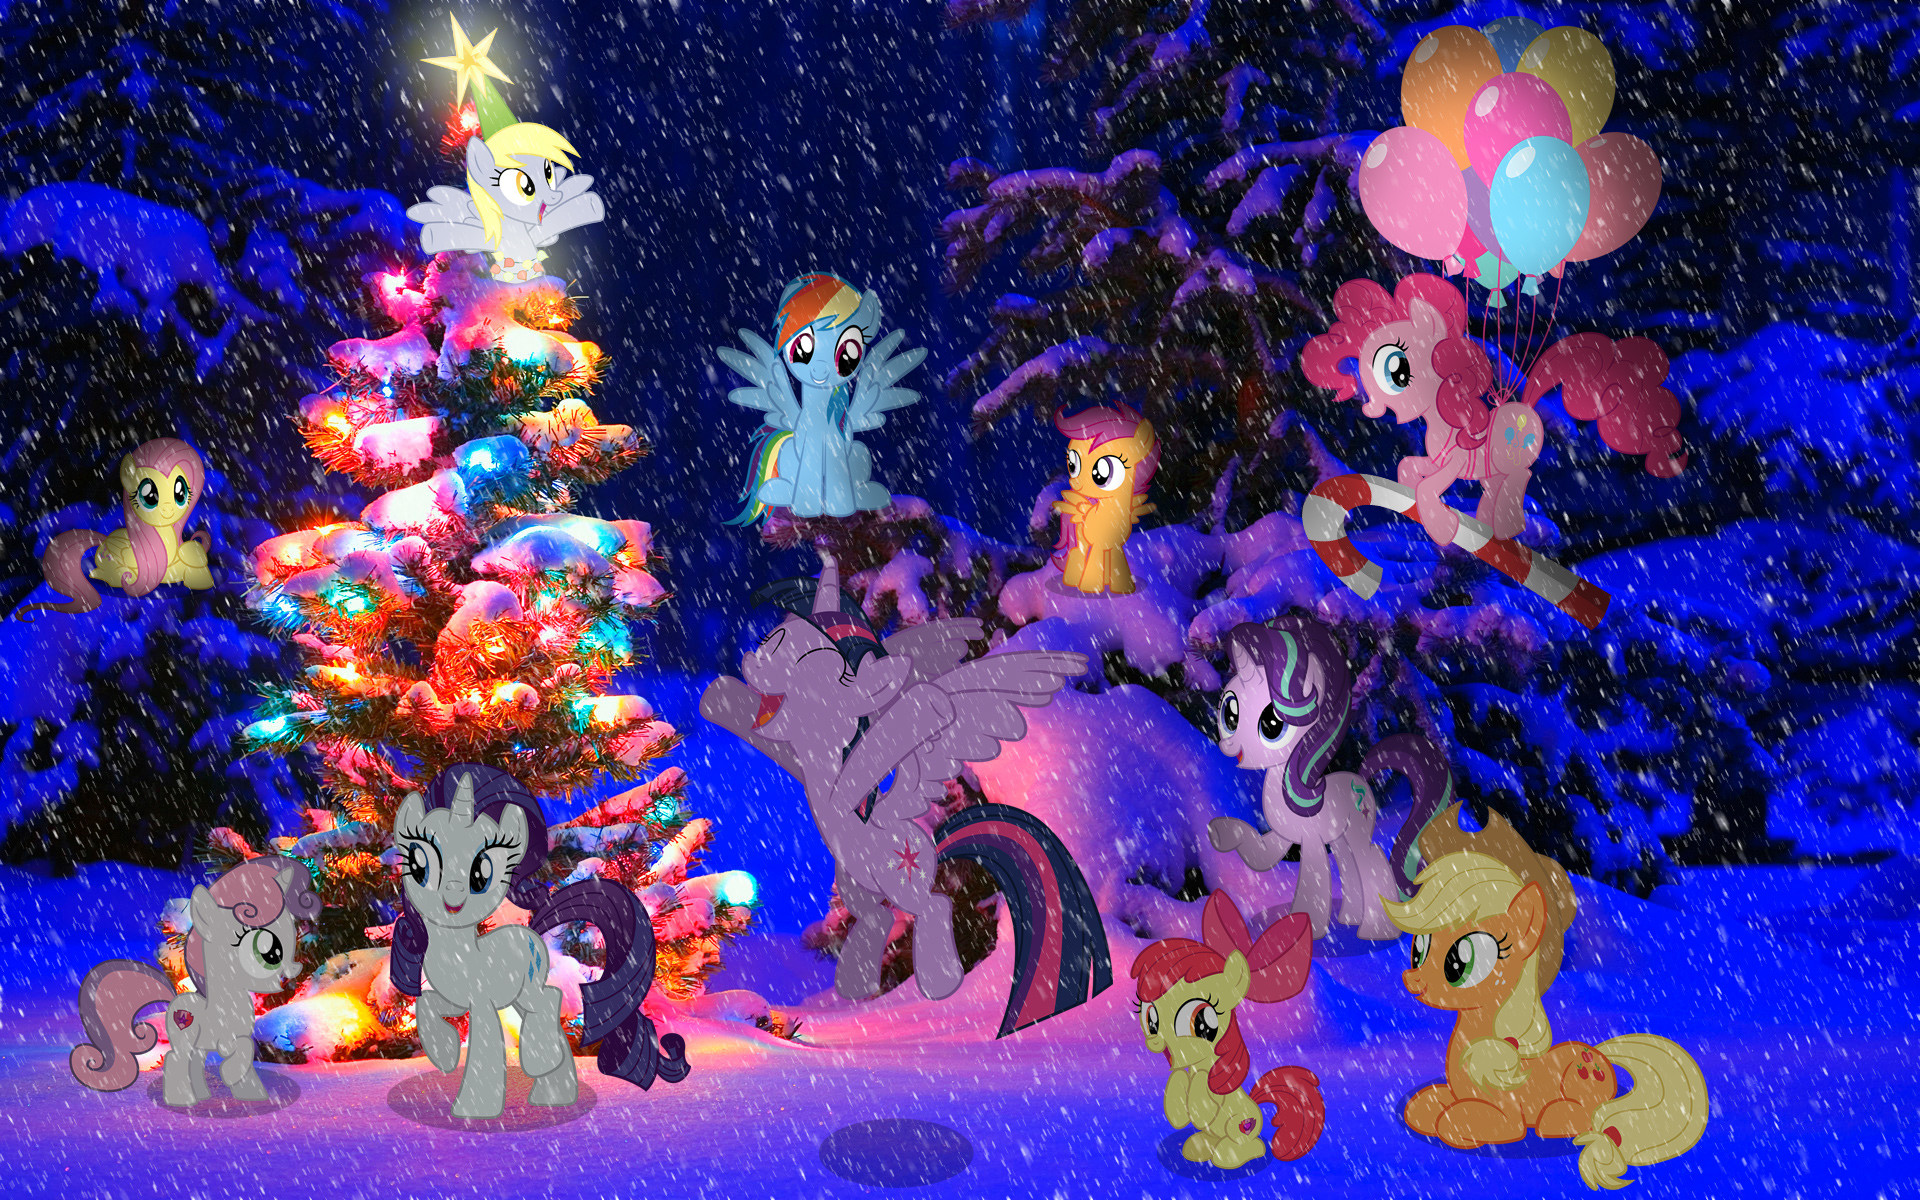 1920x1200 Christmas Wallpapers | Xmas HD Desktop Backgrounds - Page 1